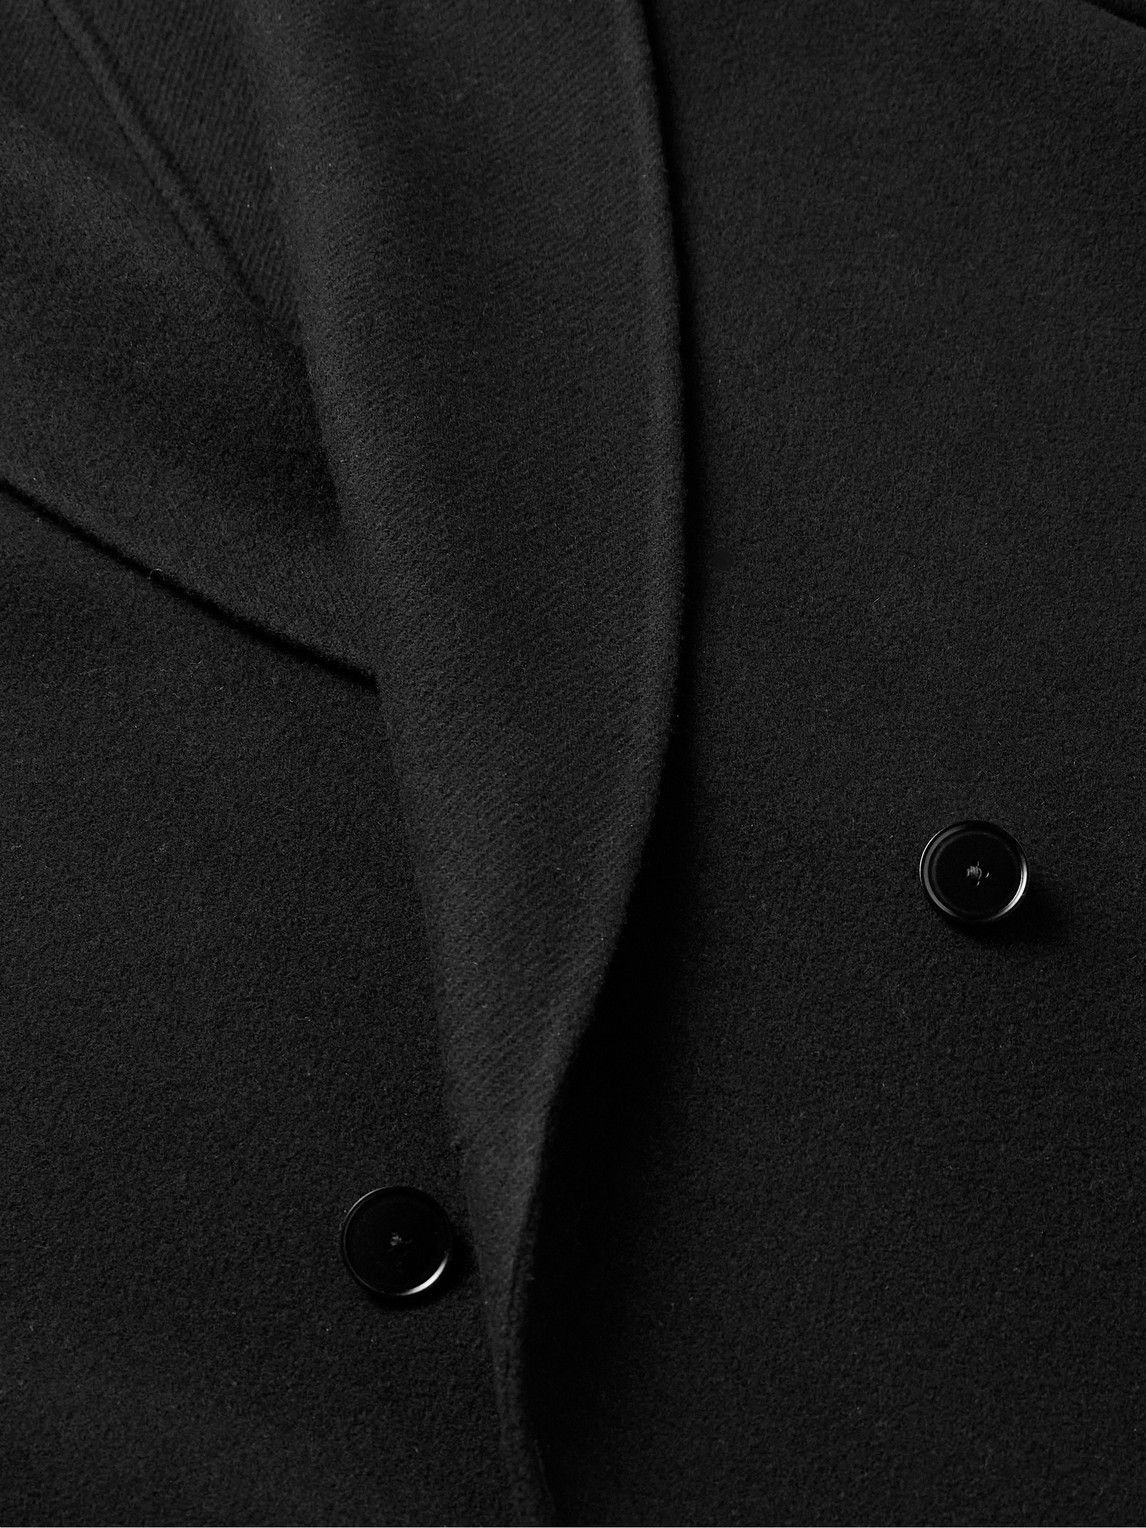 Shop The Row Ferro Belted Double-breasted Wool-blend Coat In Black